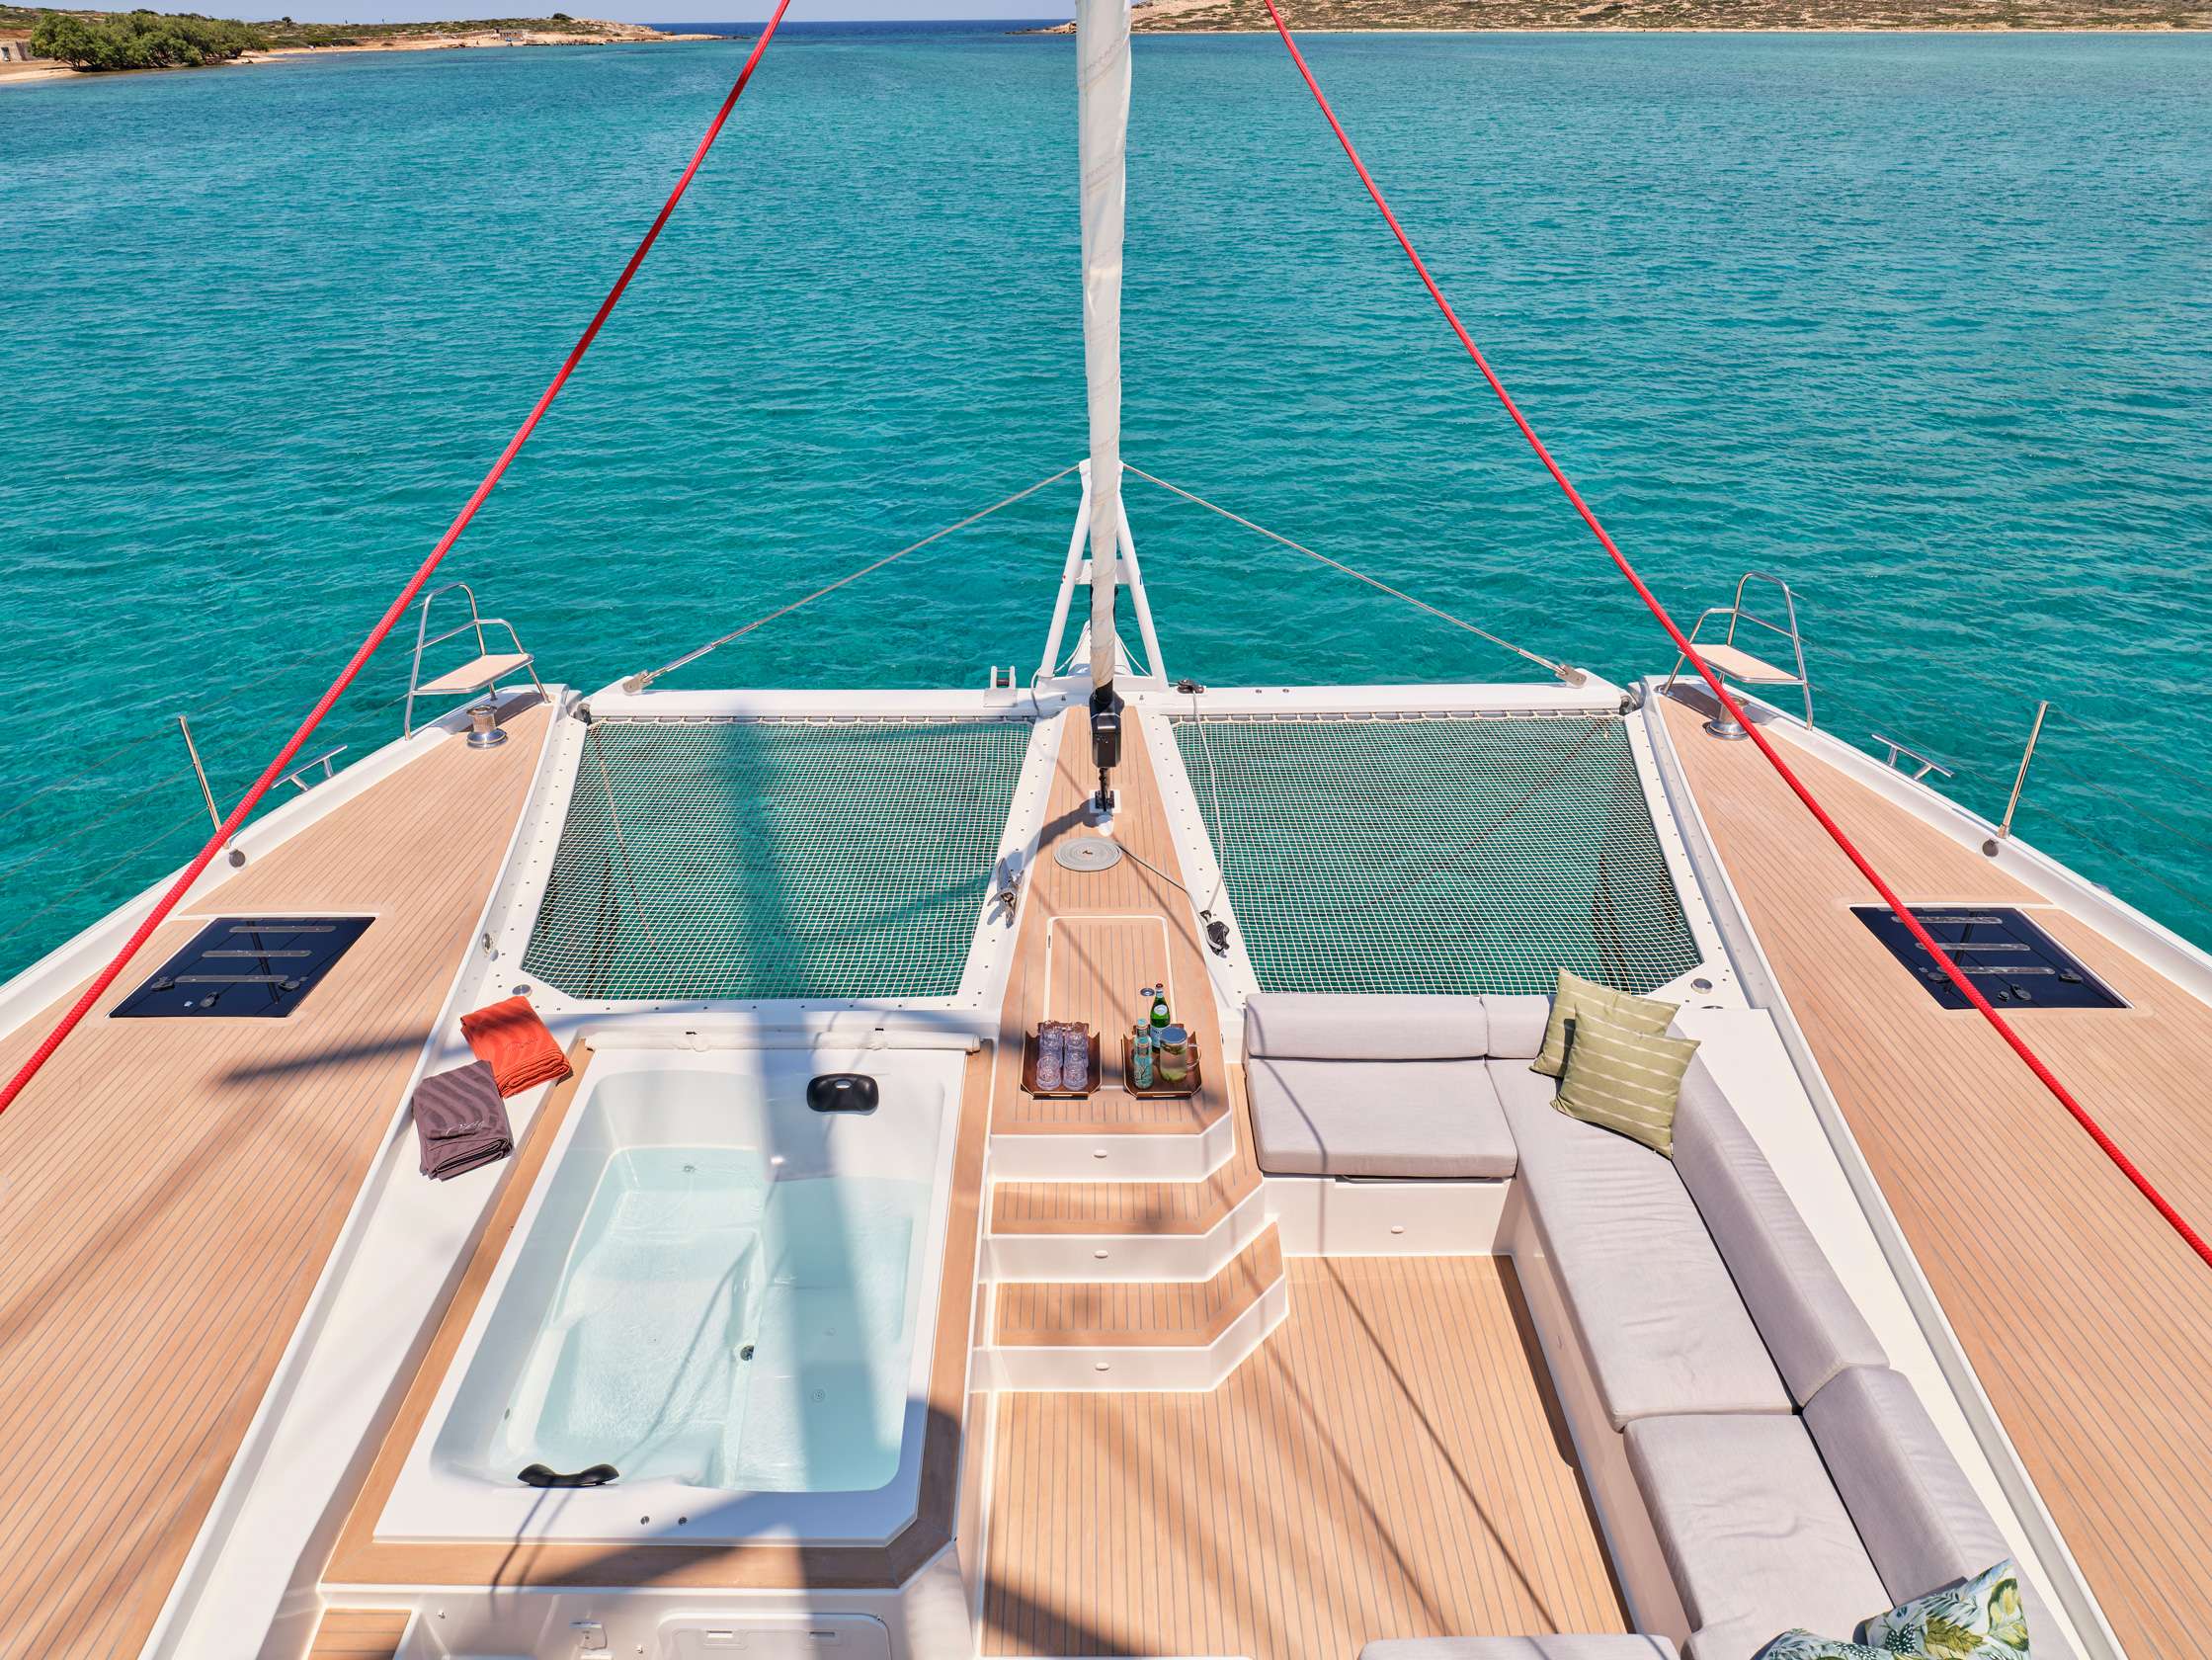 PIXIE Yacht Charter - Fore deck seating area with Jacuzzi